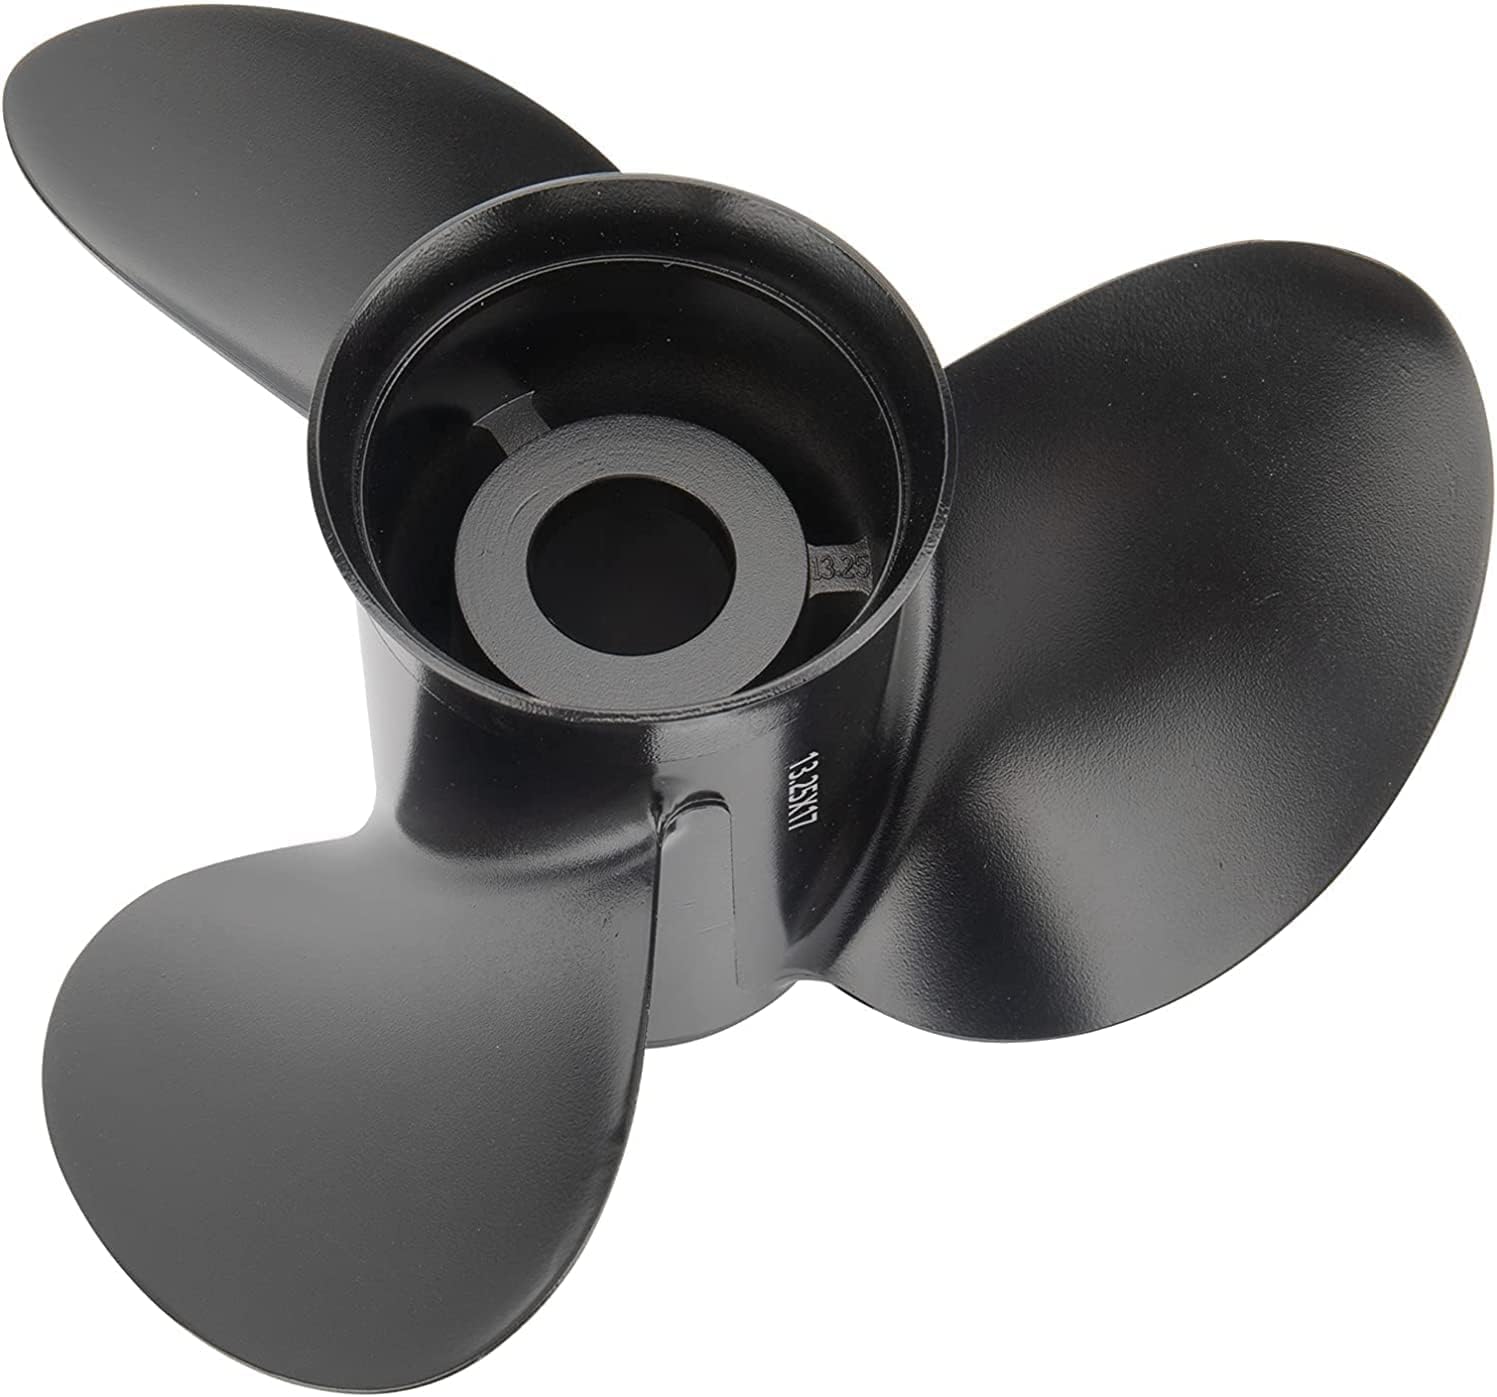 for BRP,Johnson,Evinrude,OMC Stern Drive 40-140HP,2-Stroke with All Kits Aluminum 3 Blades Prop Propeller